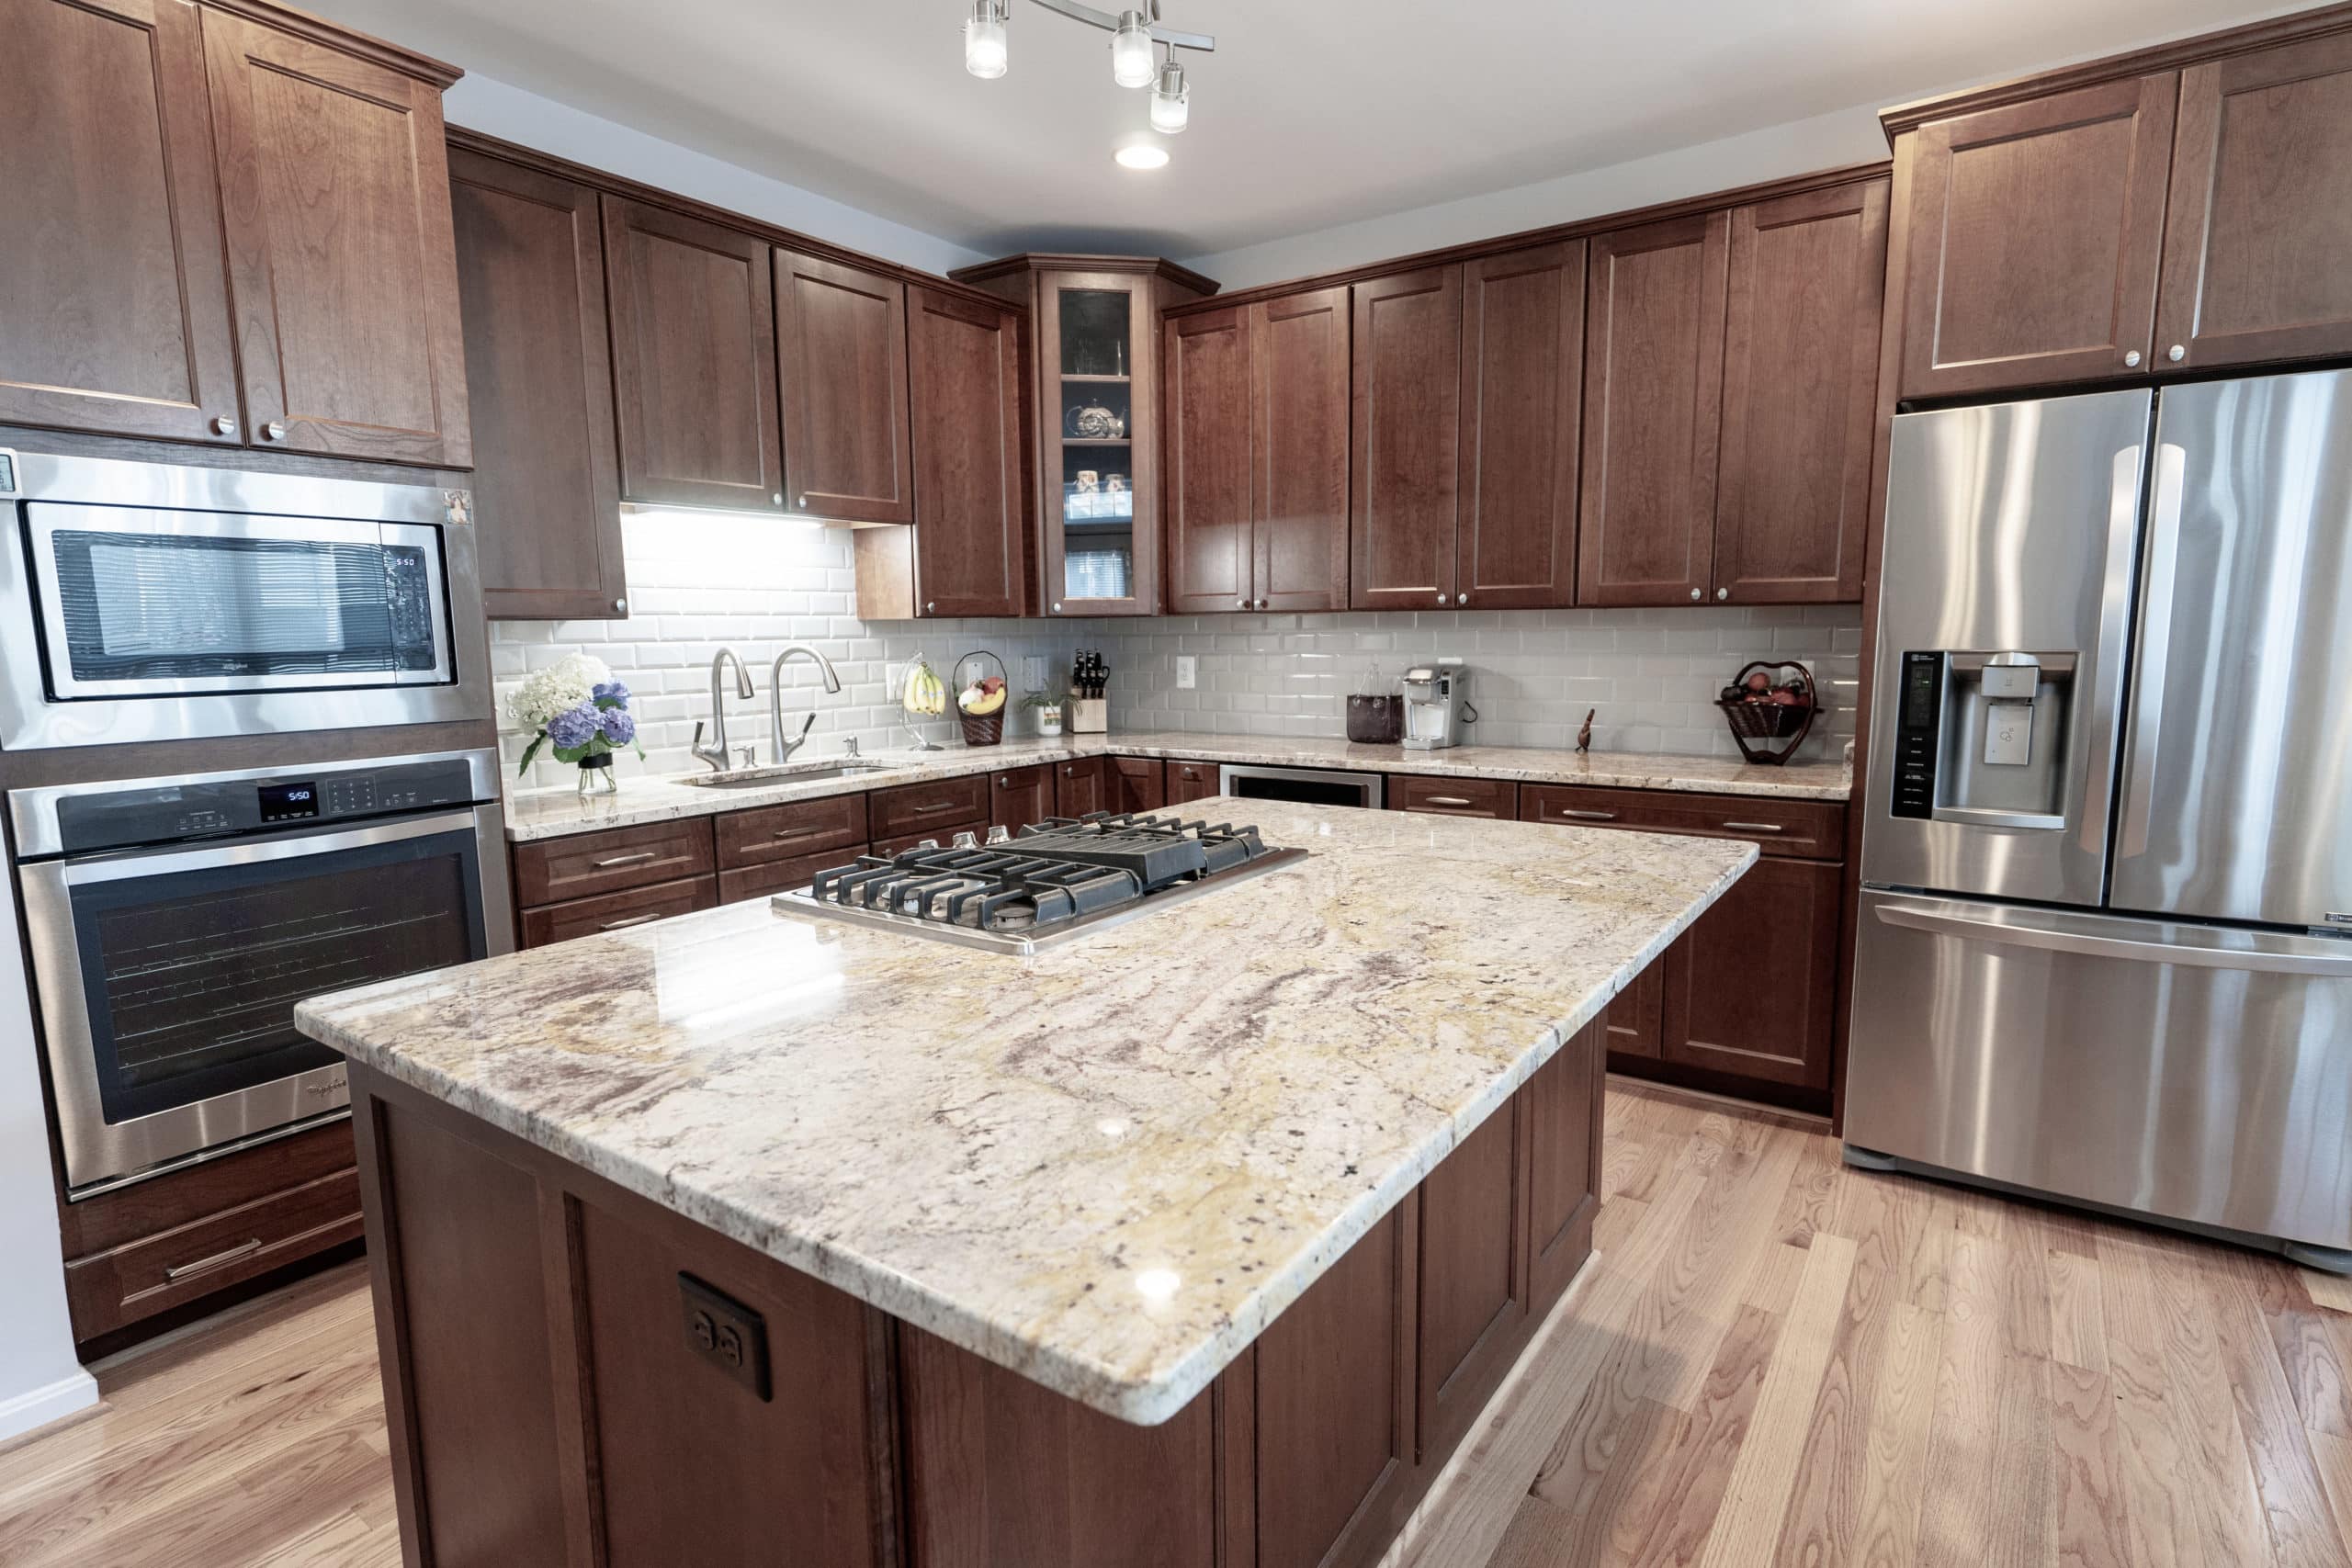 Kitchen Remodeling In Fairfax Va Bath Remodeling Usa Cabinet Store